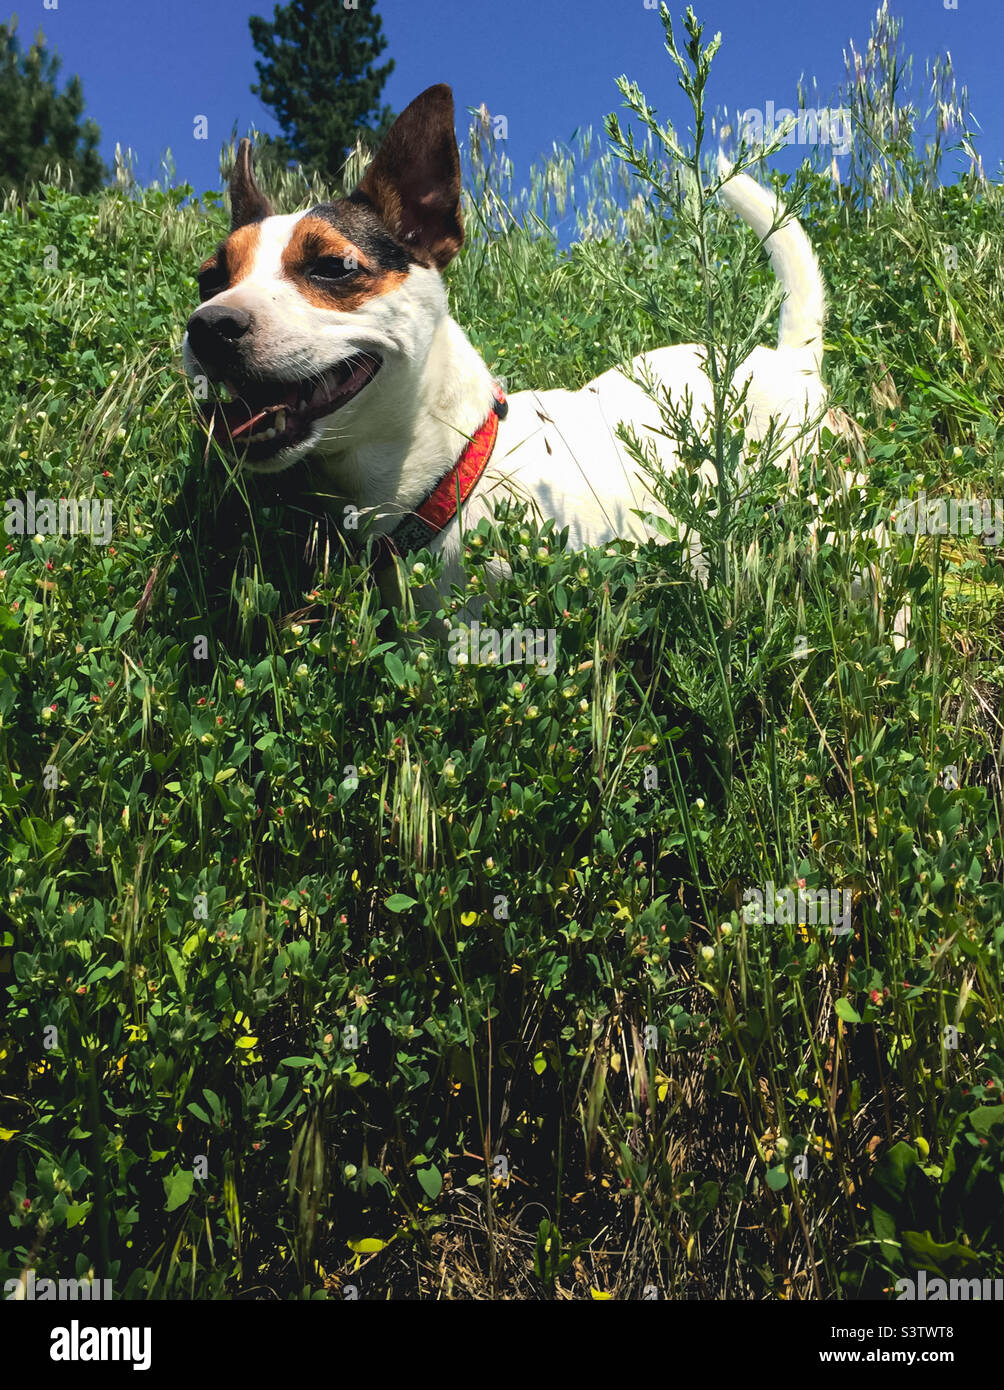 Low angle view of a smiling Jack Russell Terrier dog standing in tall wild grasses on a hillside on a sunny day Stock Photo